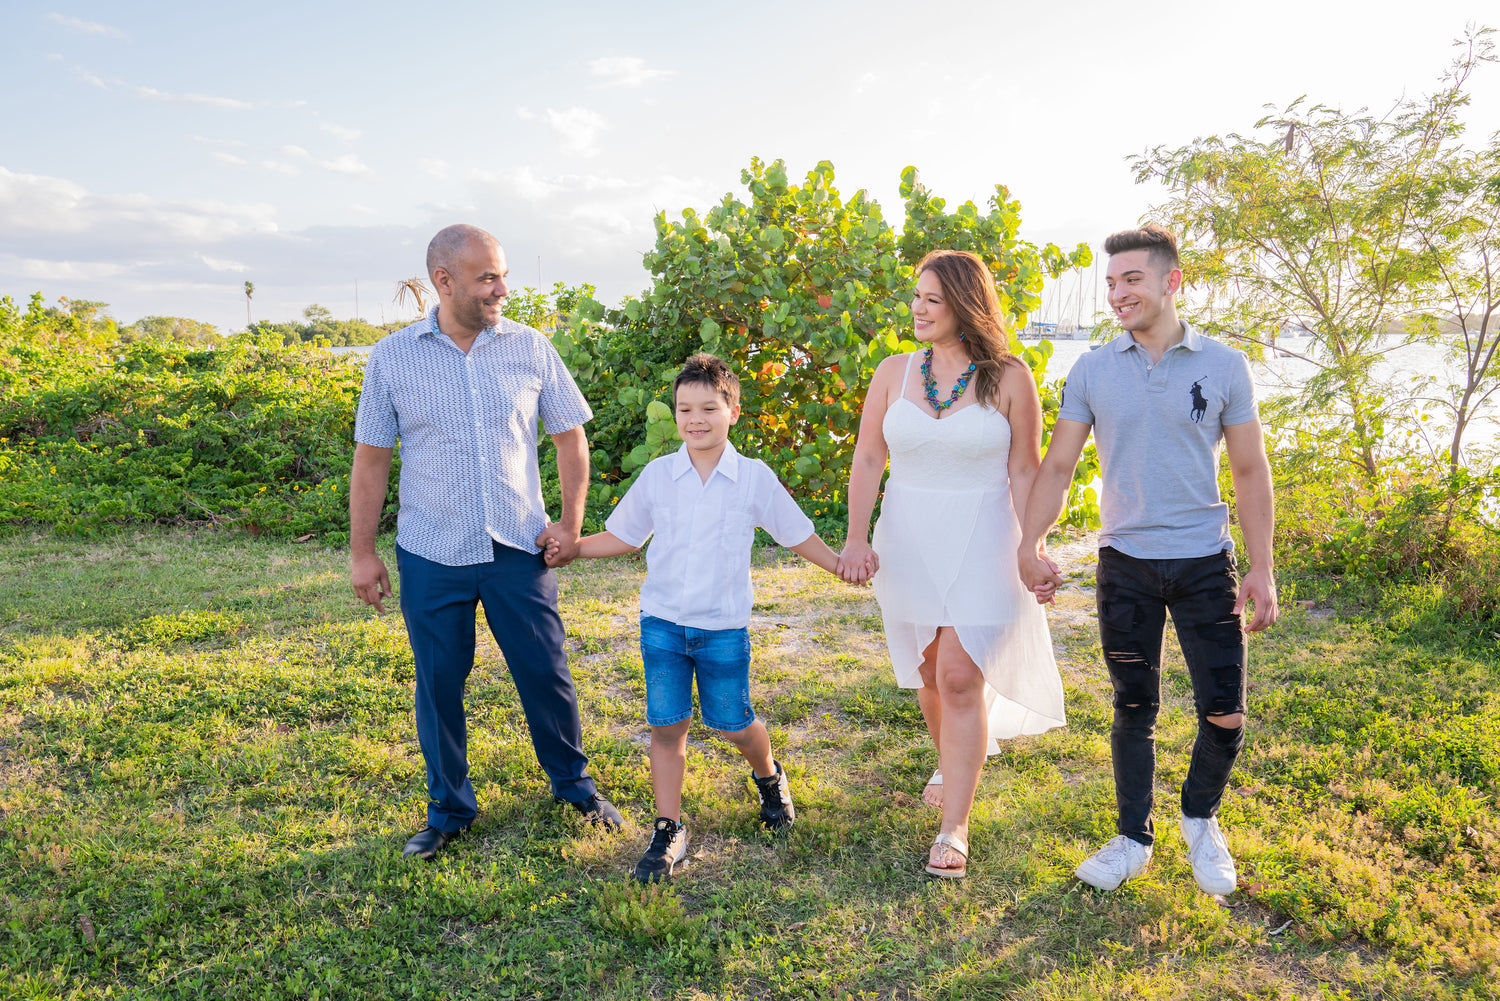 At VR Seeds and Fruits, and as the family we are, we feel both passionate and committed to the integrity of this business. I feel grateful to have my husband and two children on board supporting me every step of the way on this journey.